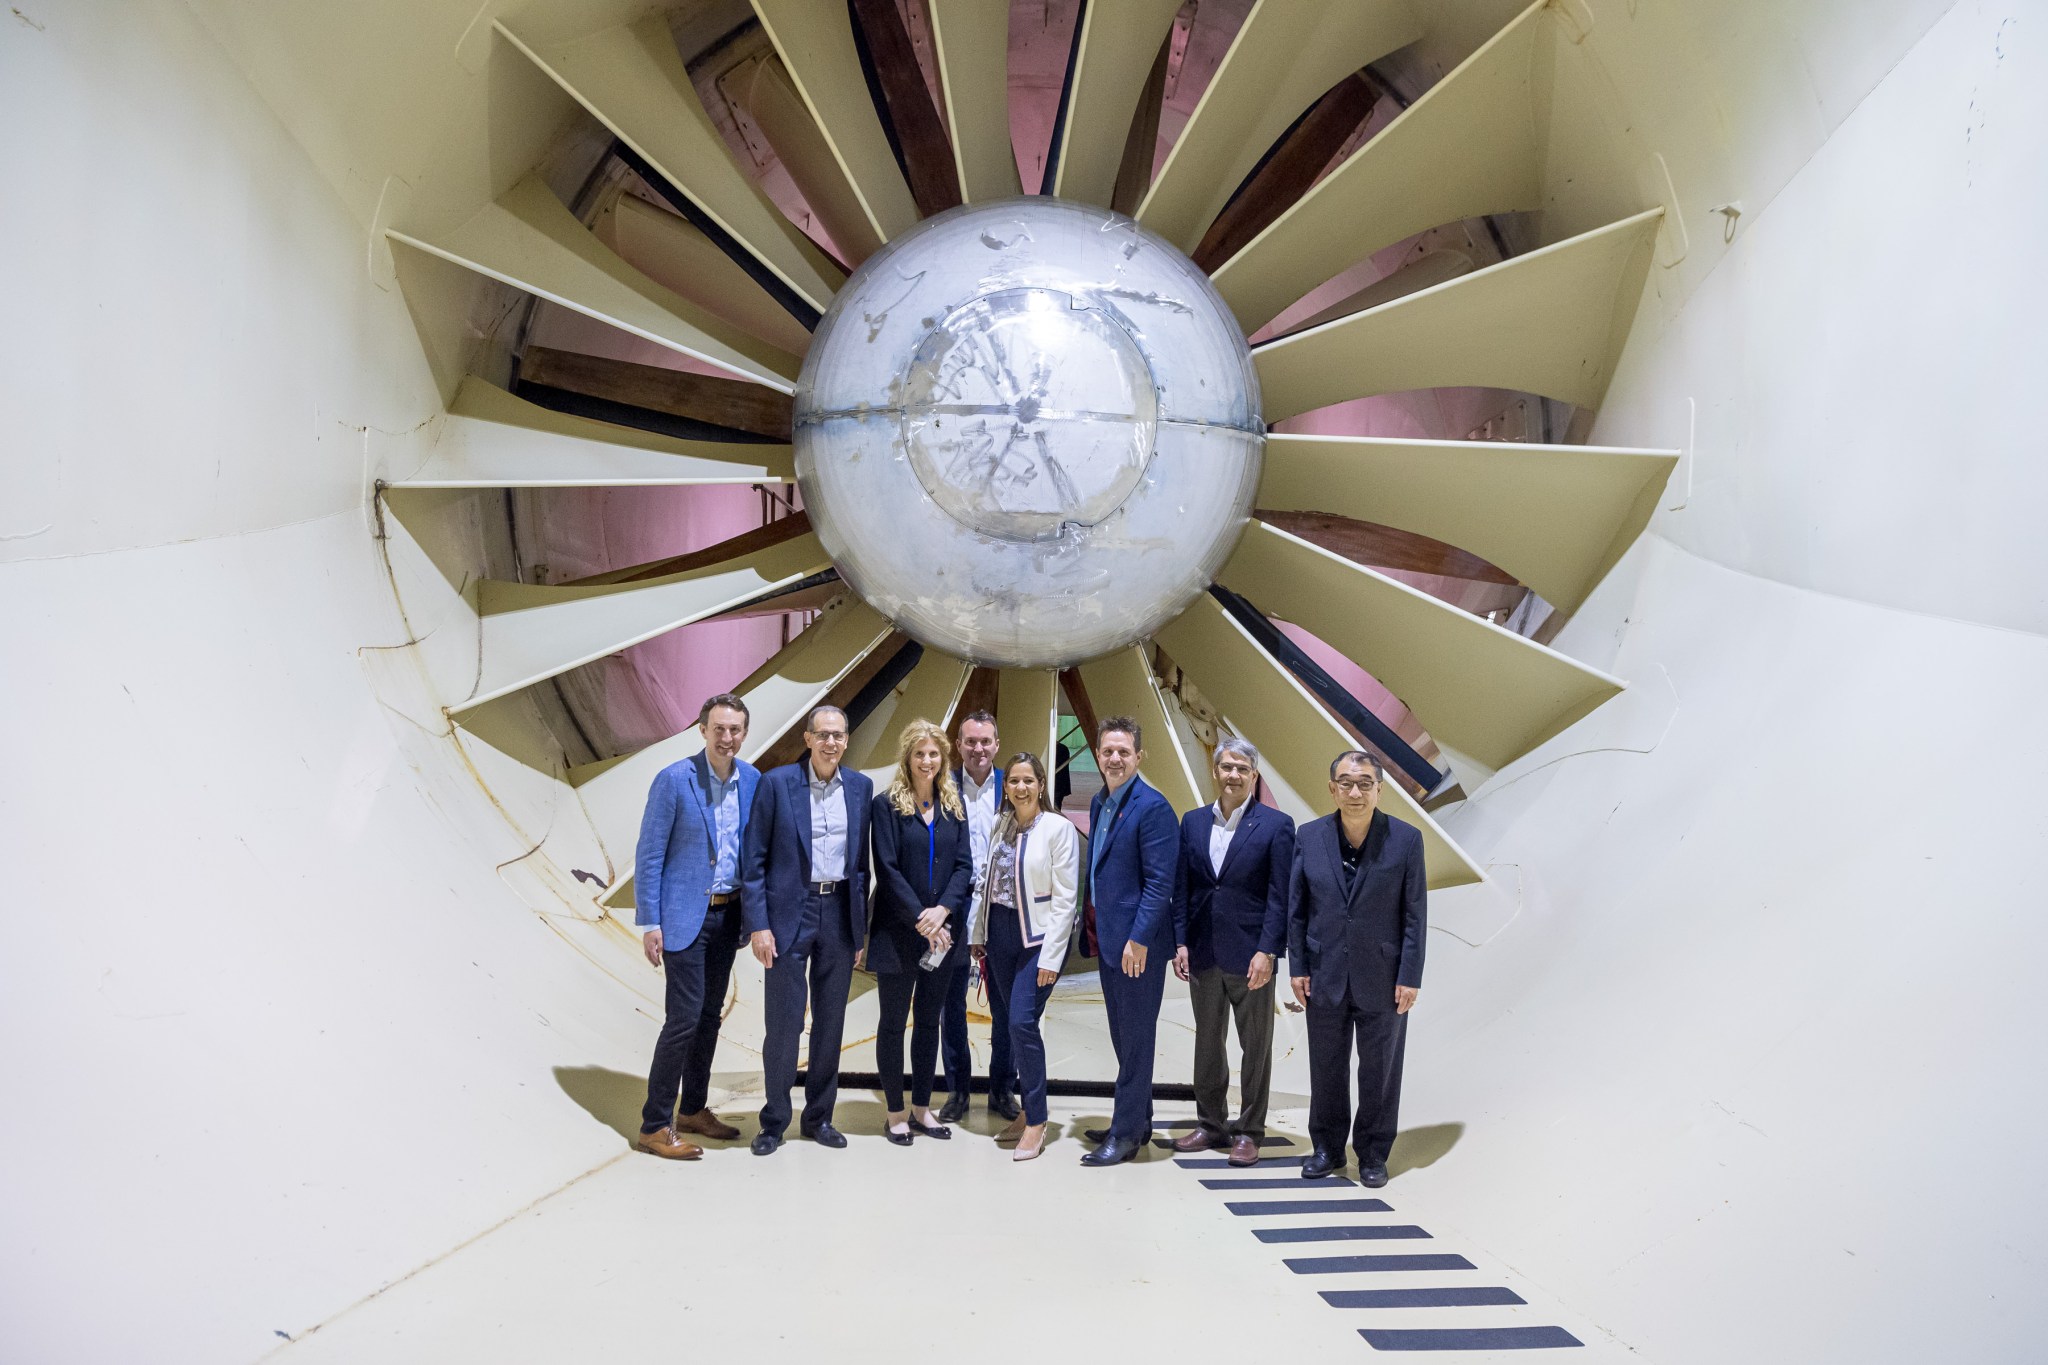 NAC Committee members from the May 2019 meeting at Glenn Research Center standing in a wind tunnel.